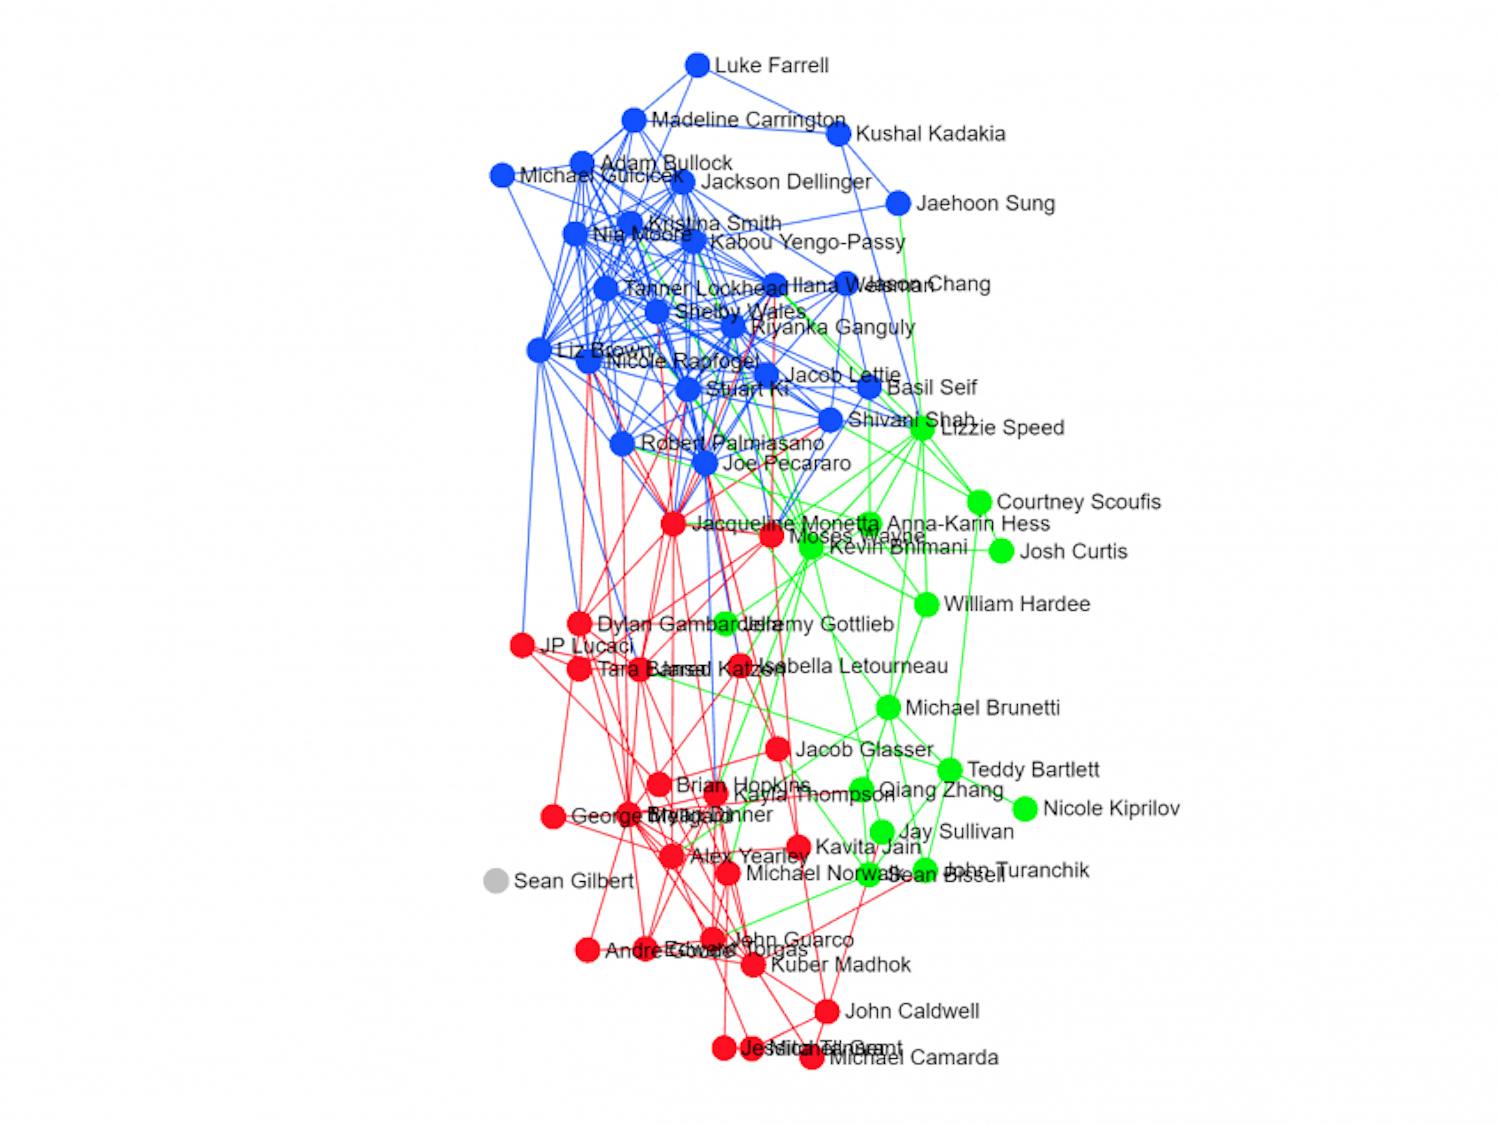 DSG records show that groups of senators are tightly connected by their voting patterns.